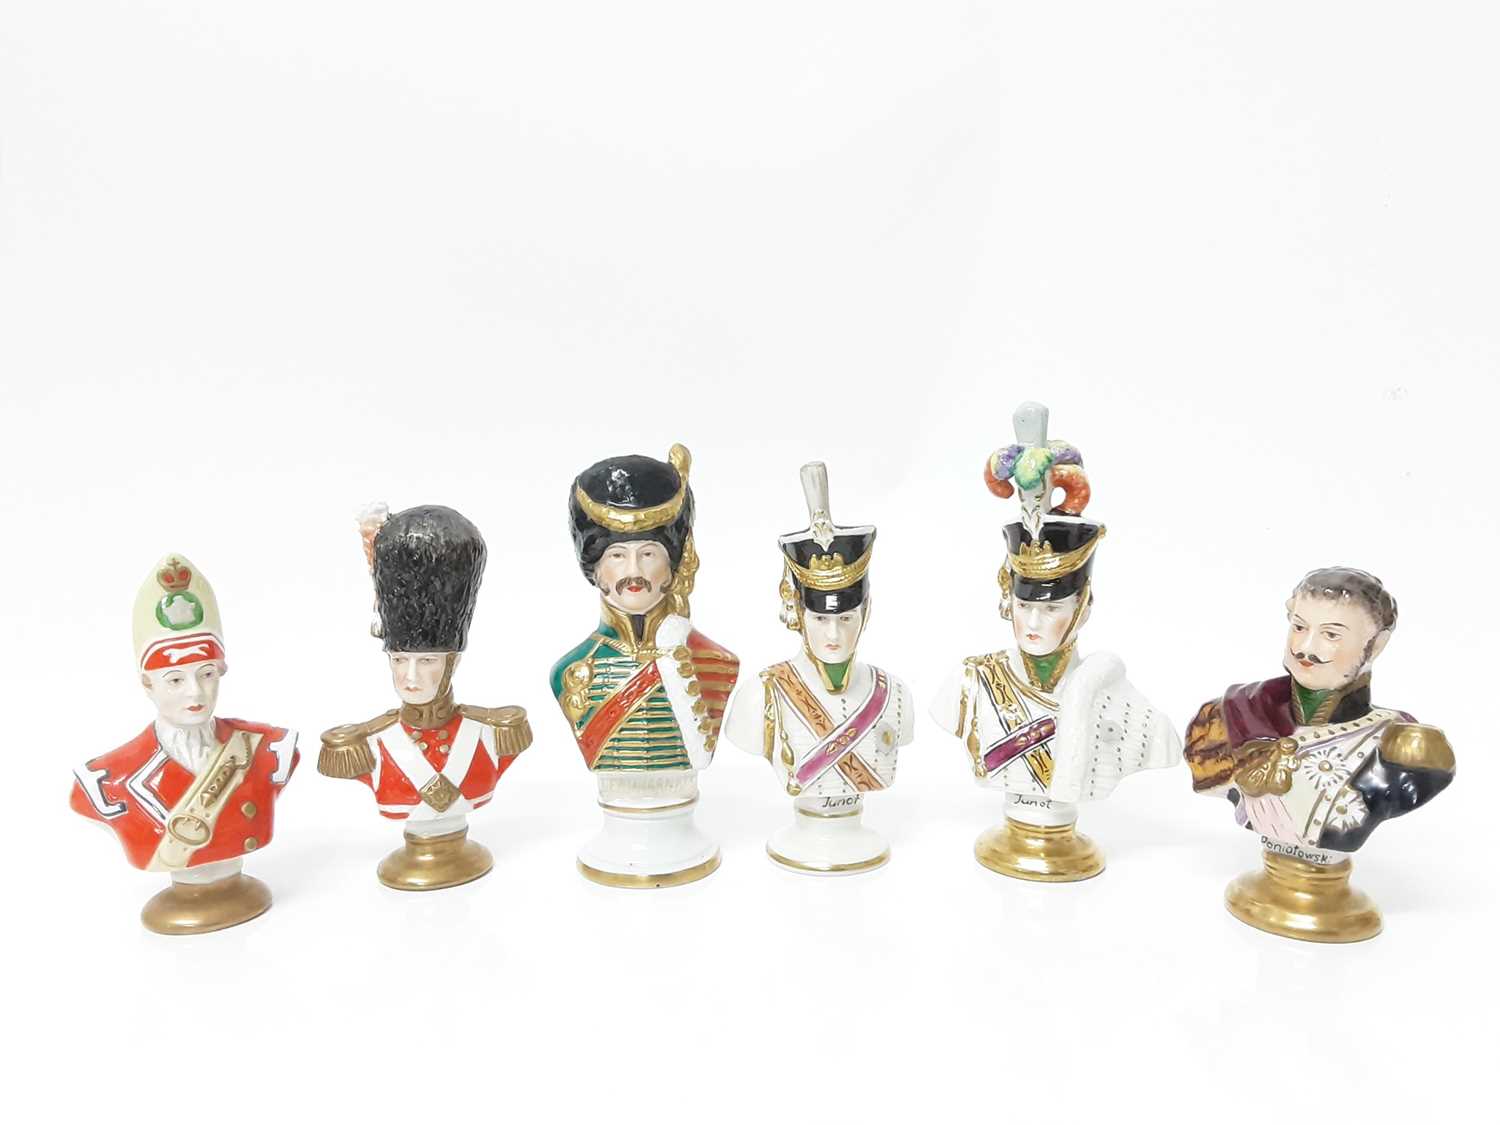 Lot 238 - Six good quality 1930's Dresden porcelain military busts, tallest is 13.5cm high